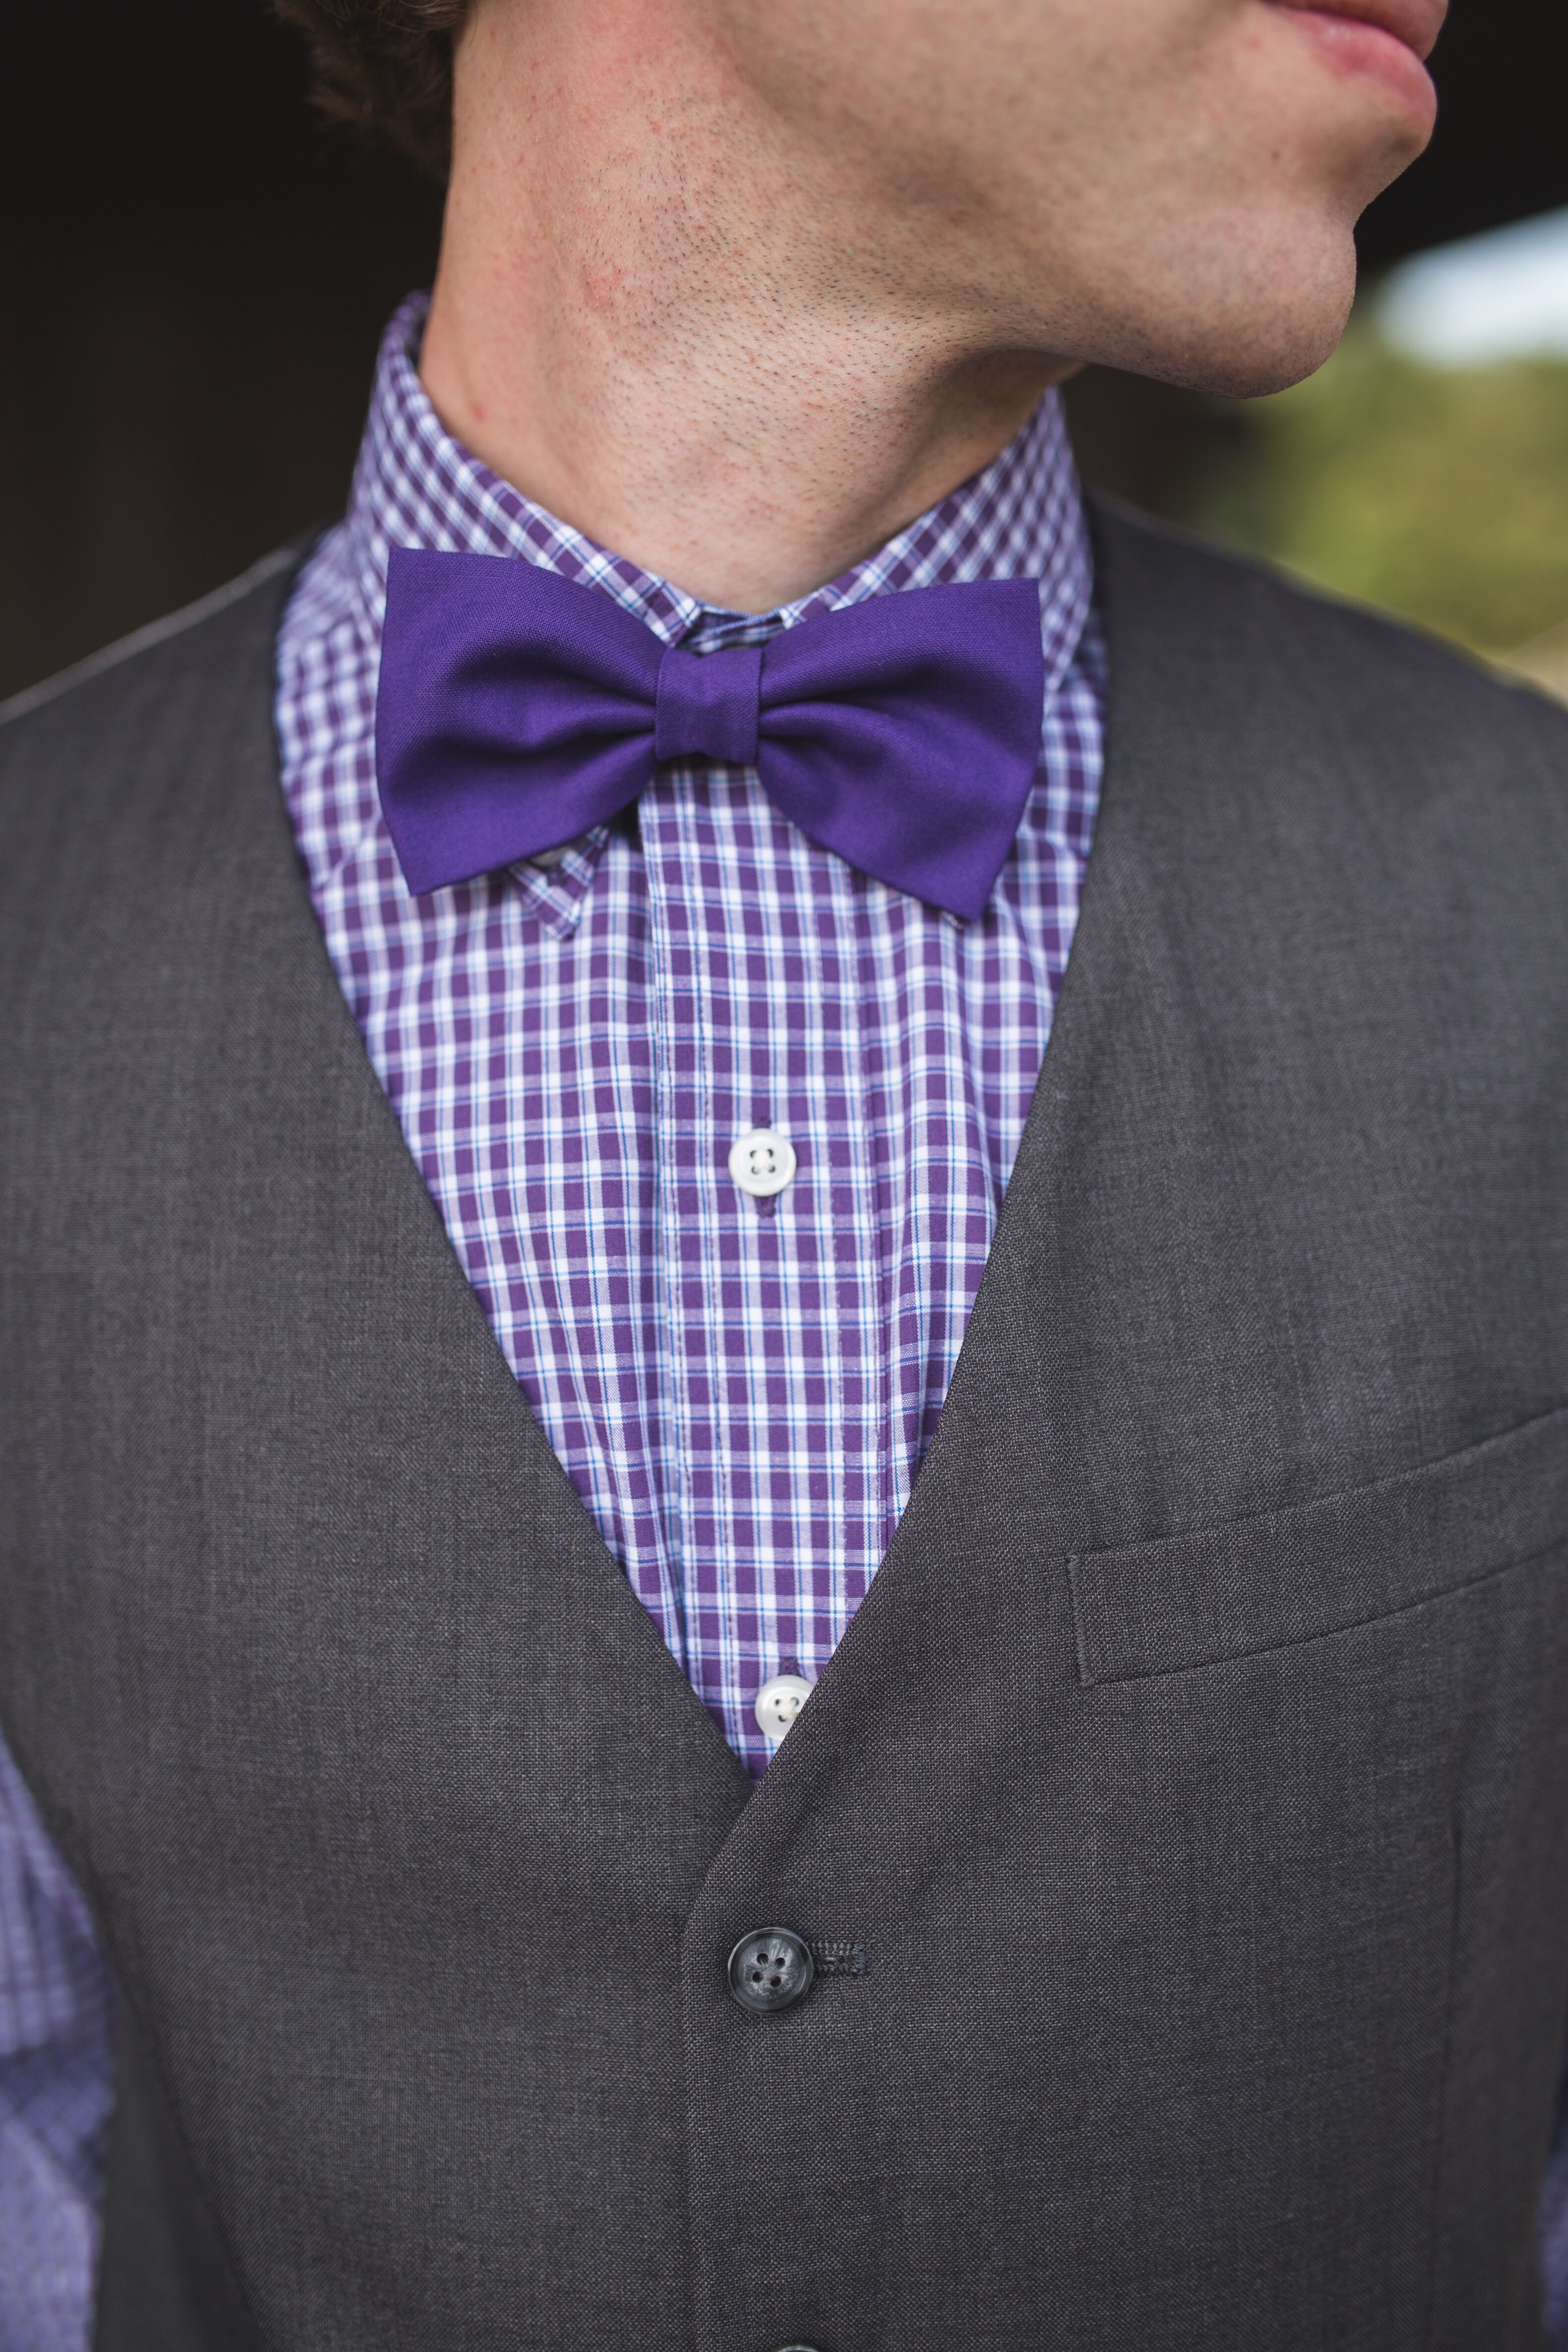 Groom in a Purple Checked Shirt With a Purple Bow Tie